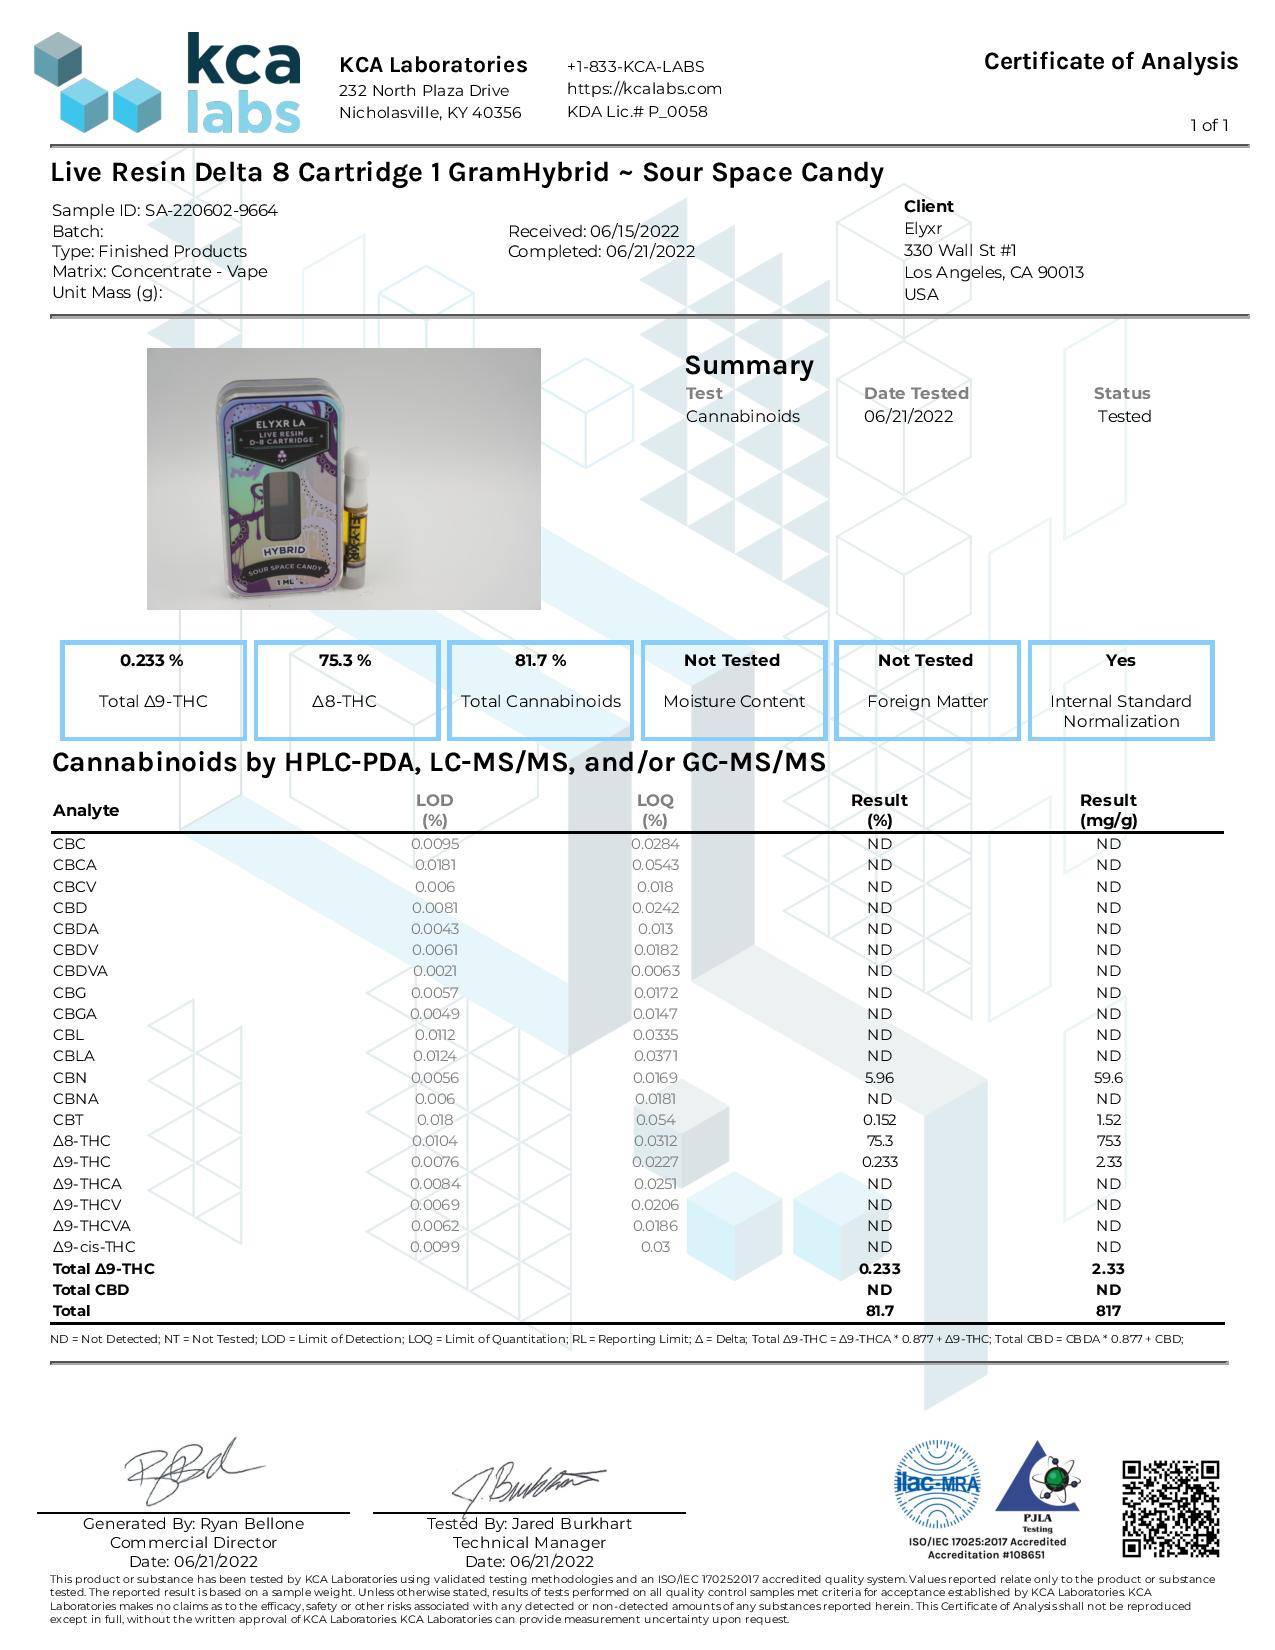 SA-220602-9664-Elyxr--Live-Resin-Delta-8-Cartridge-1-GramHybrid-_-Sour-Space-Candy-page-001.jpg